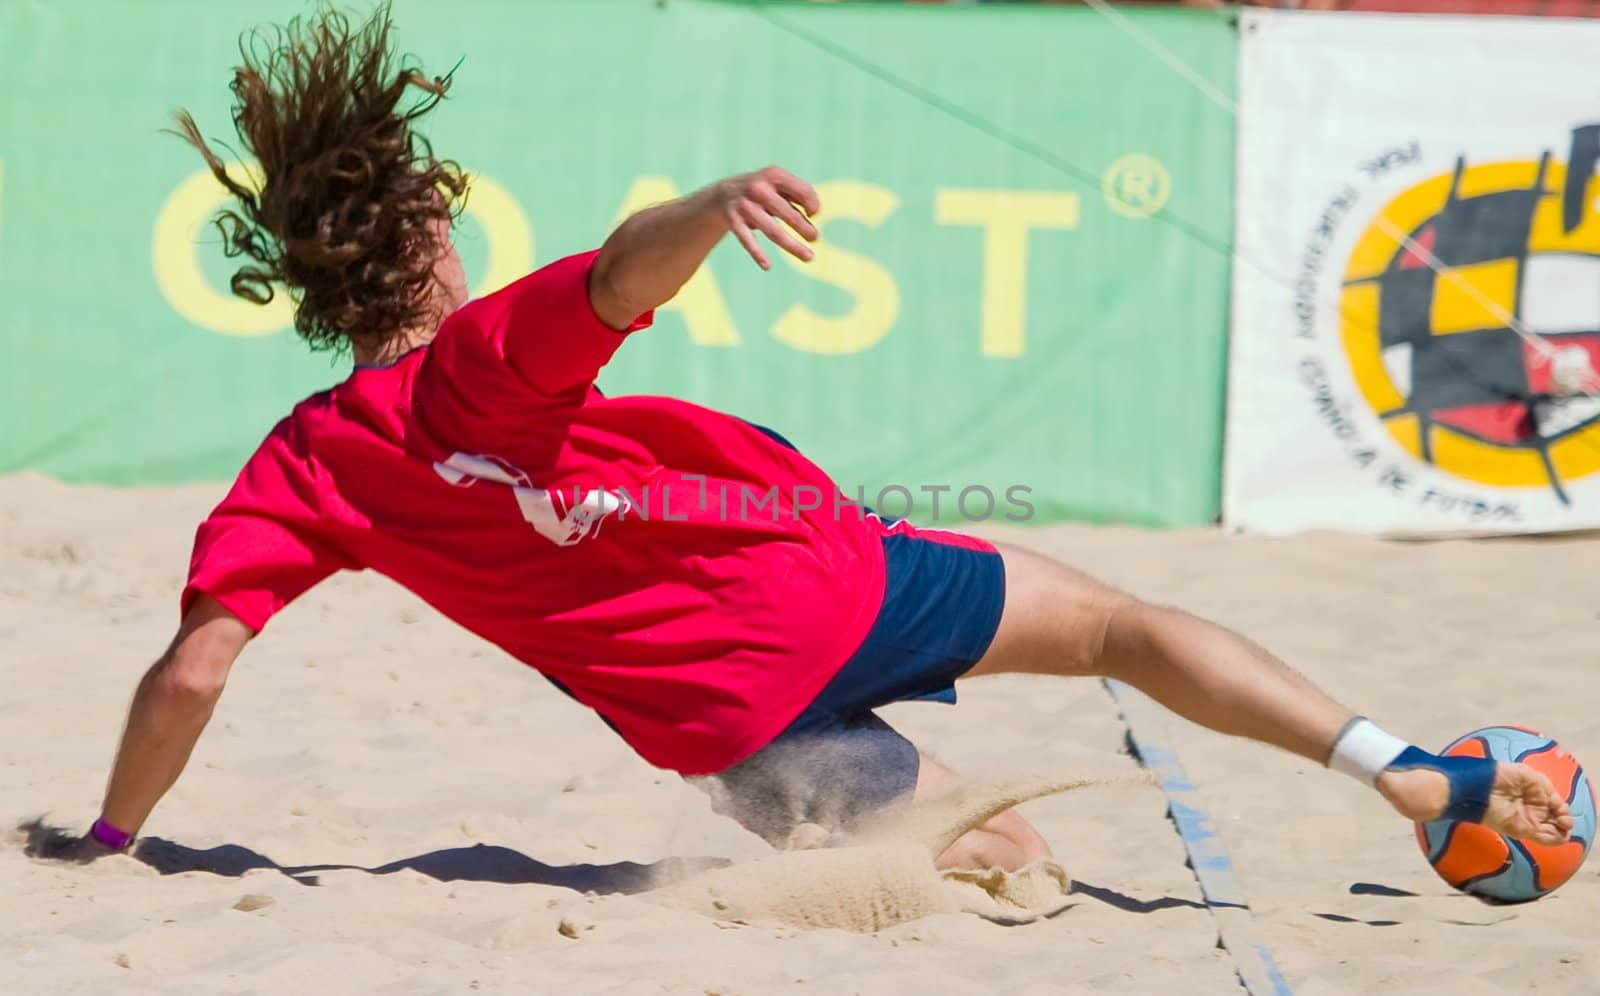 Player gliding over the sand to avoid that the ball comes out of the field